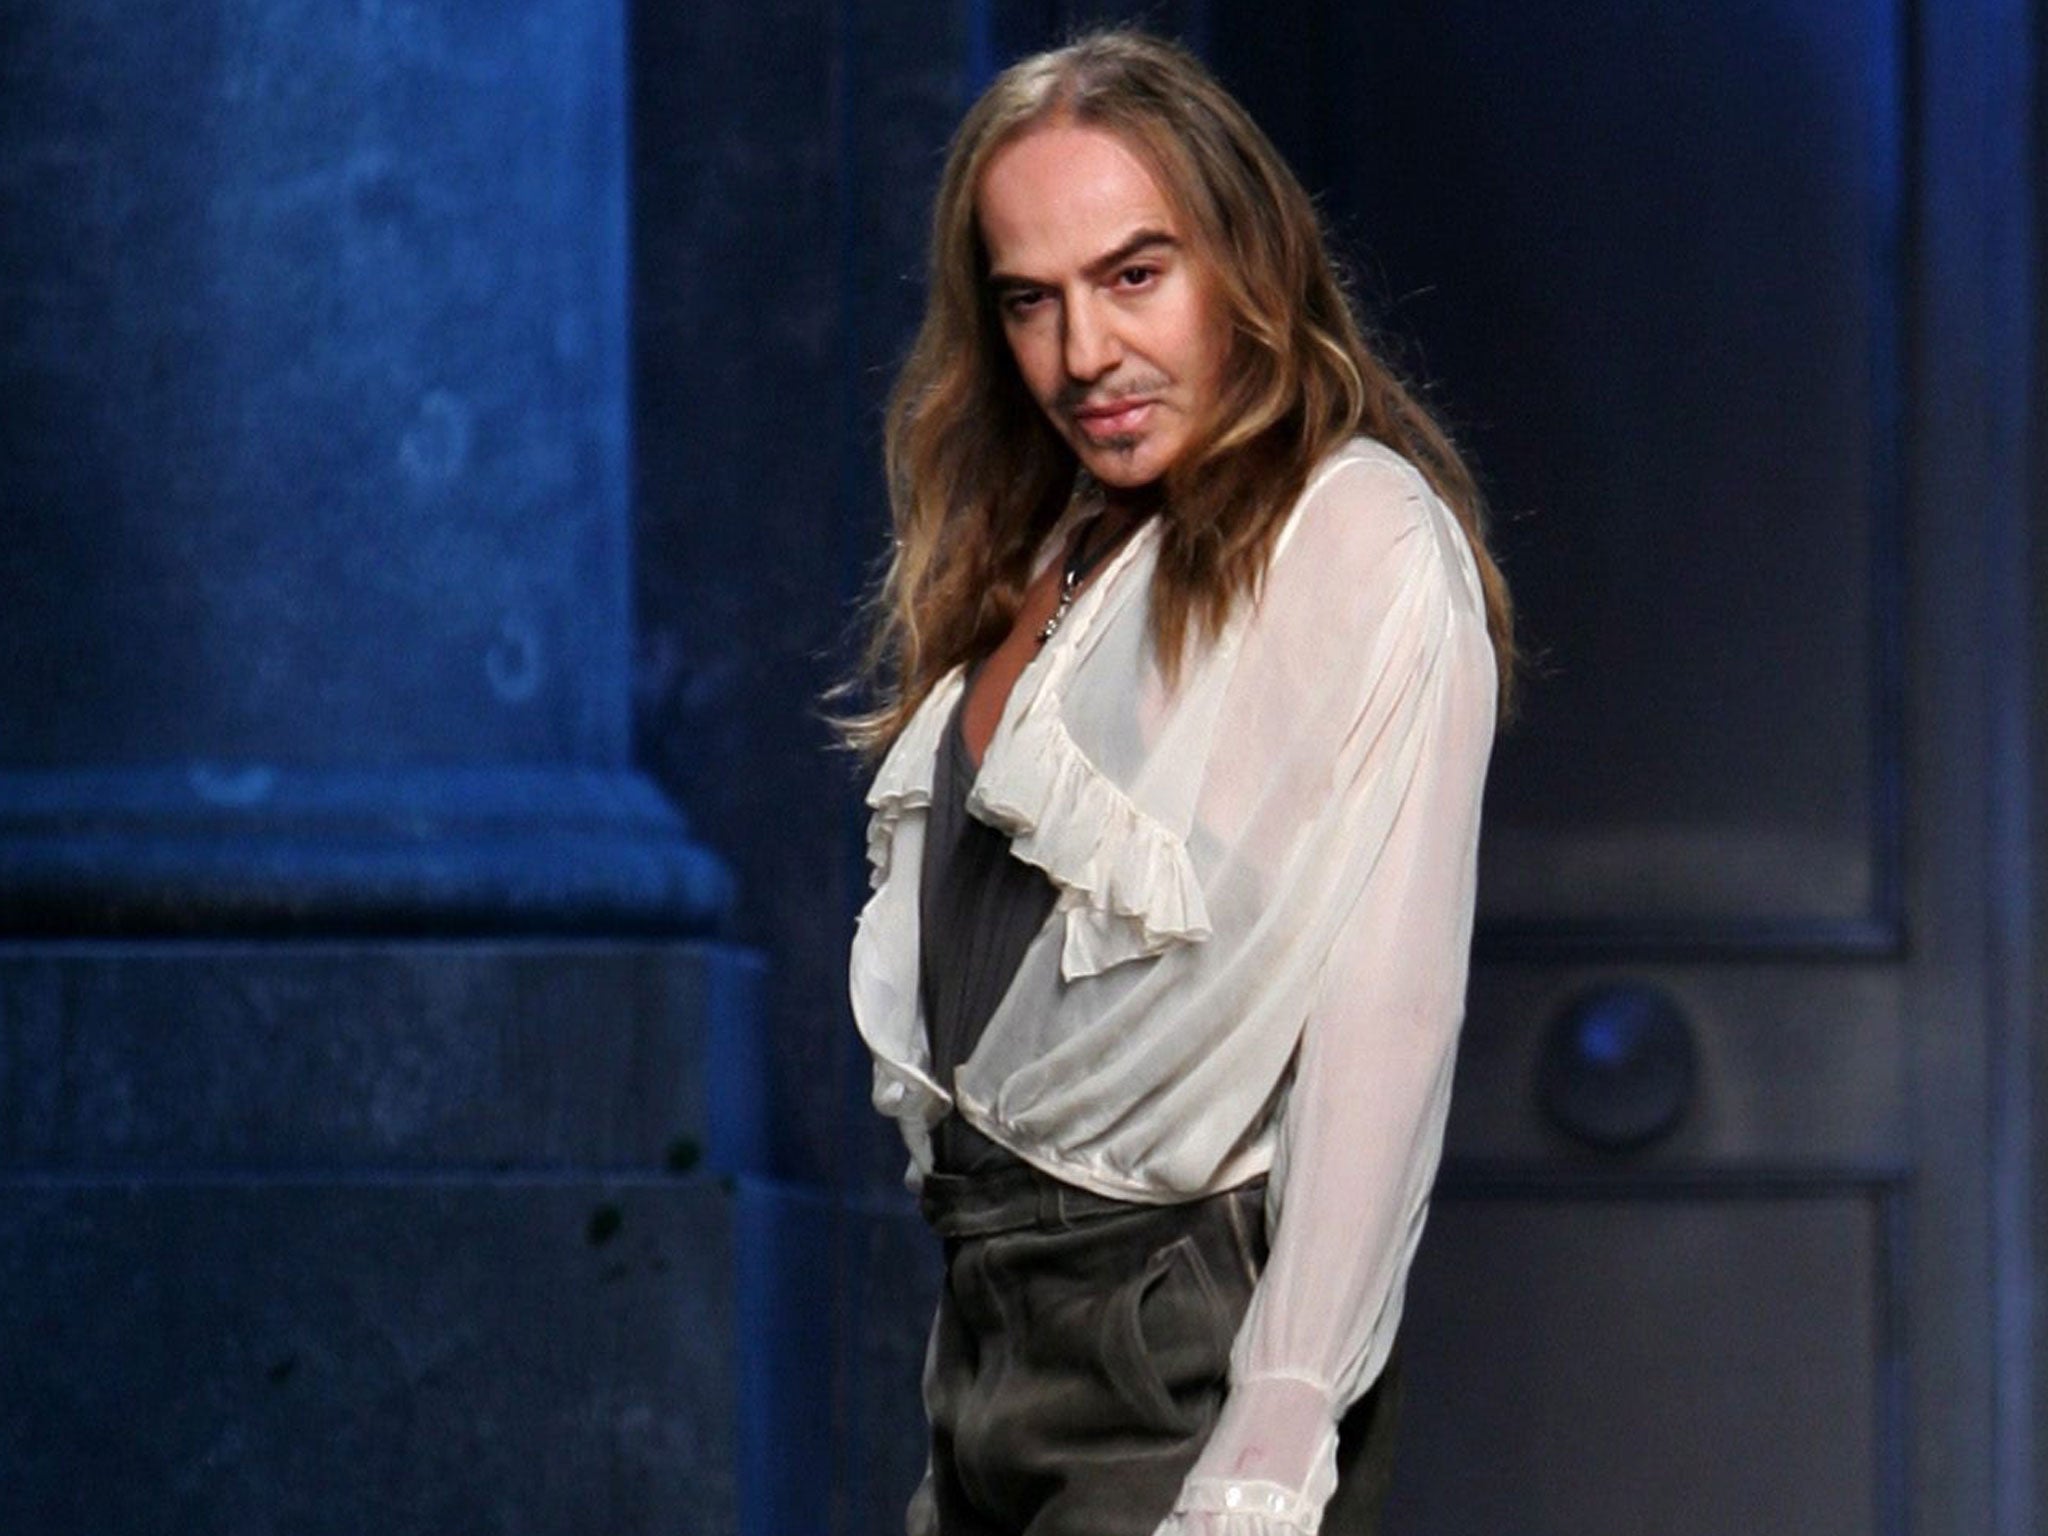 Galliano Web Video Raises More Questions - The New York Times